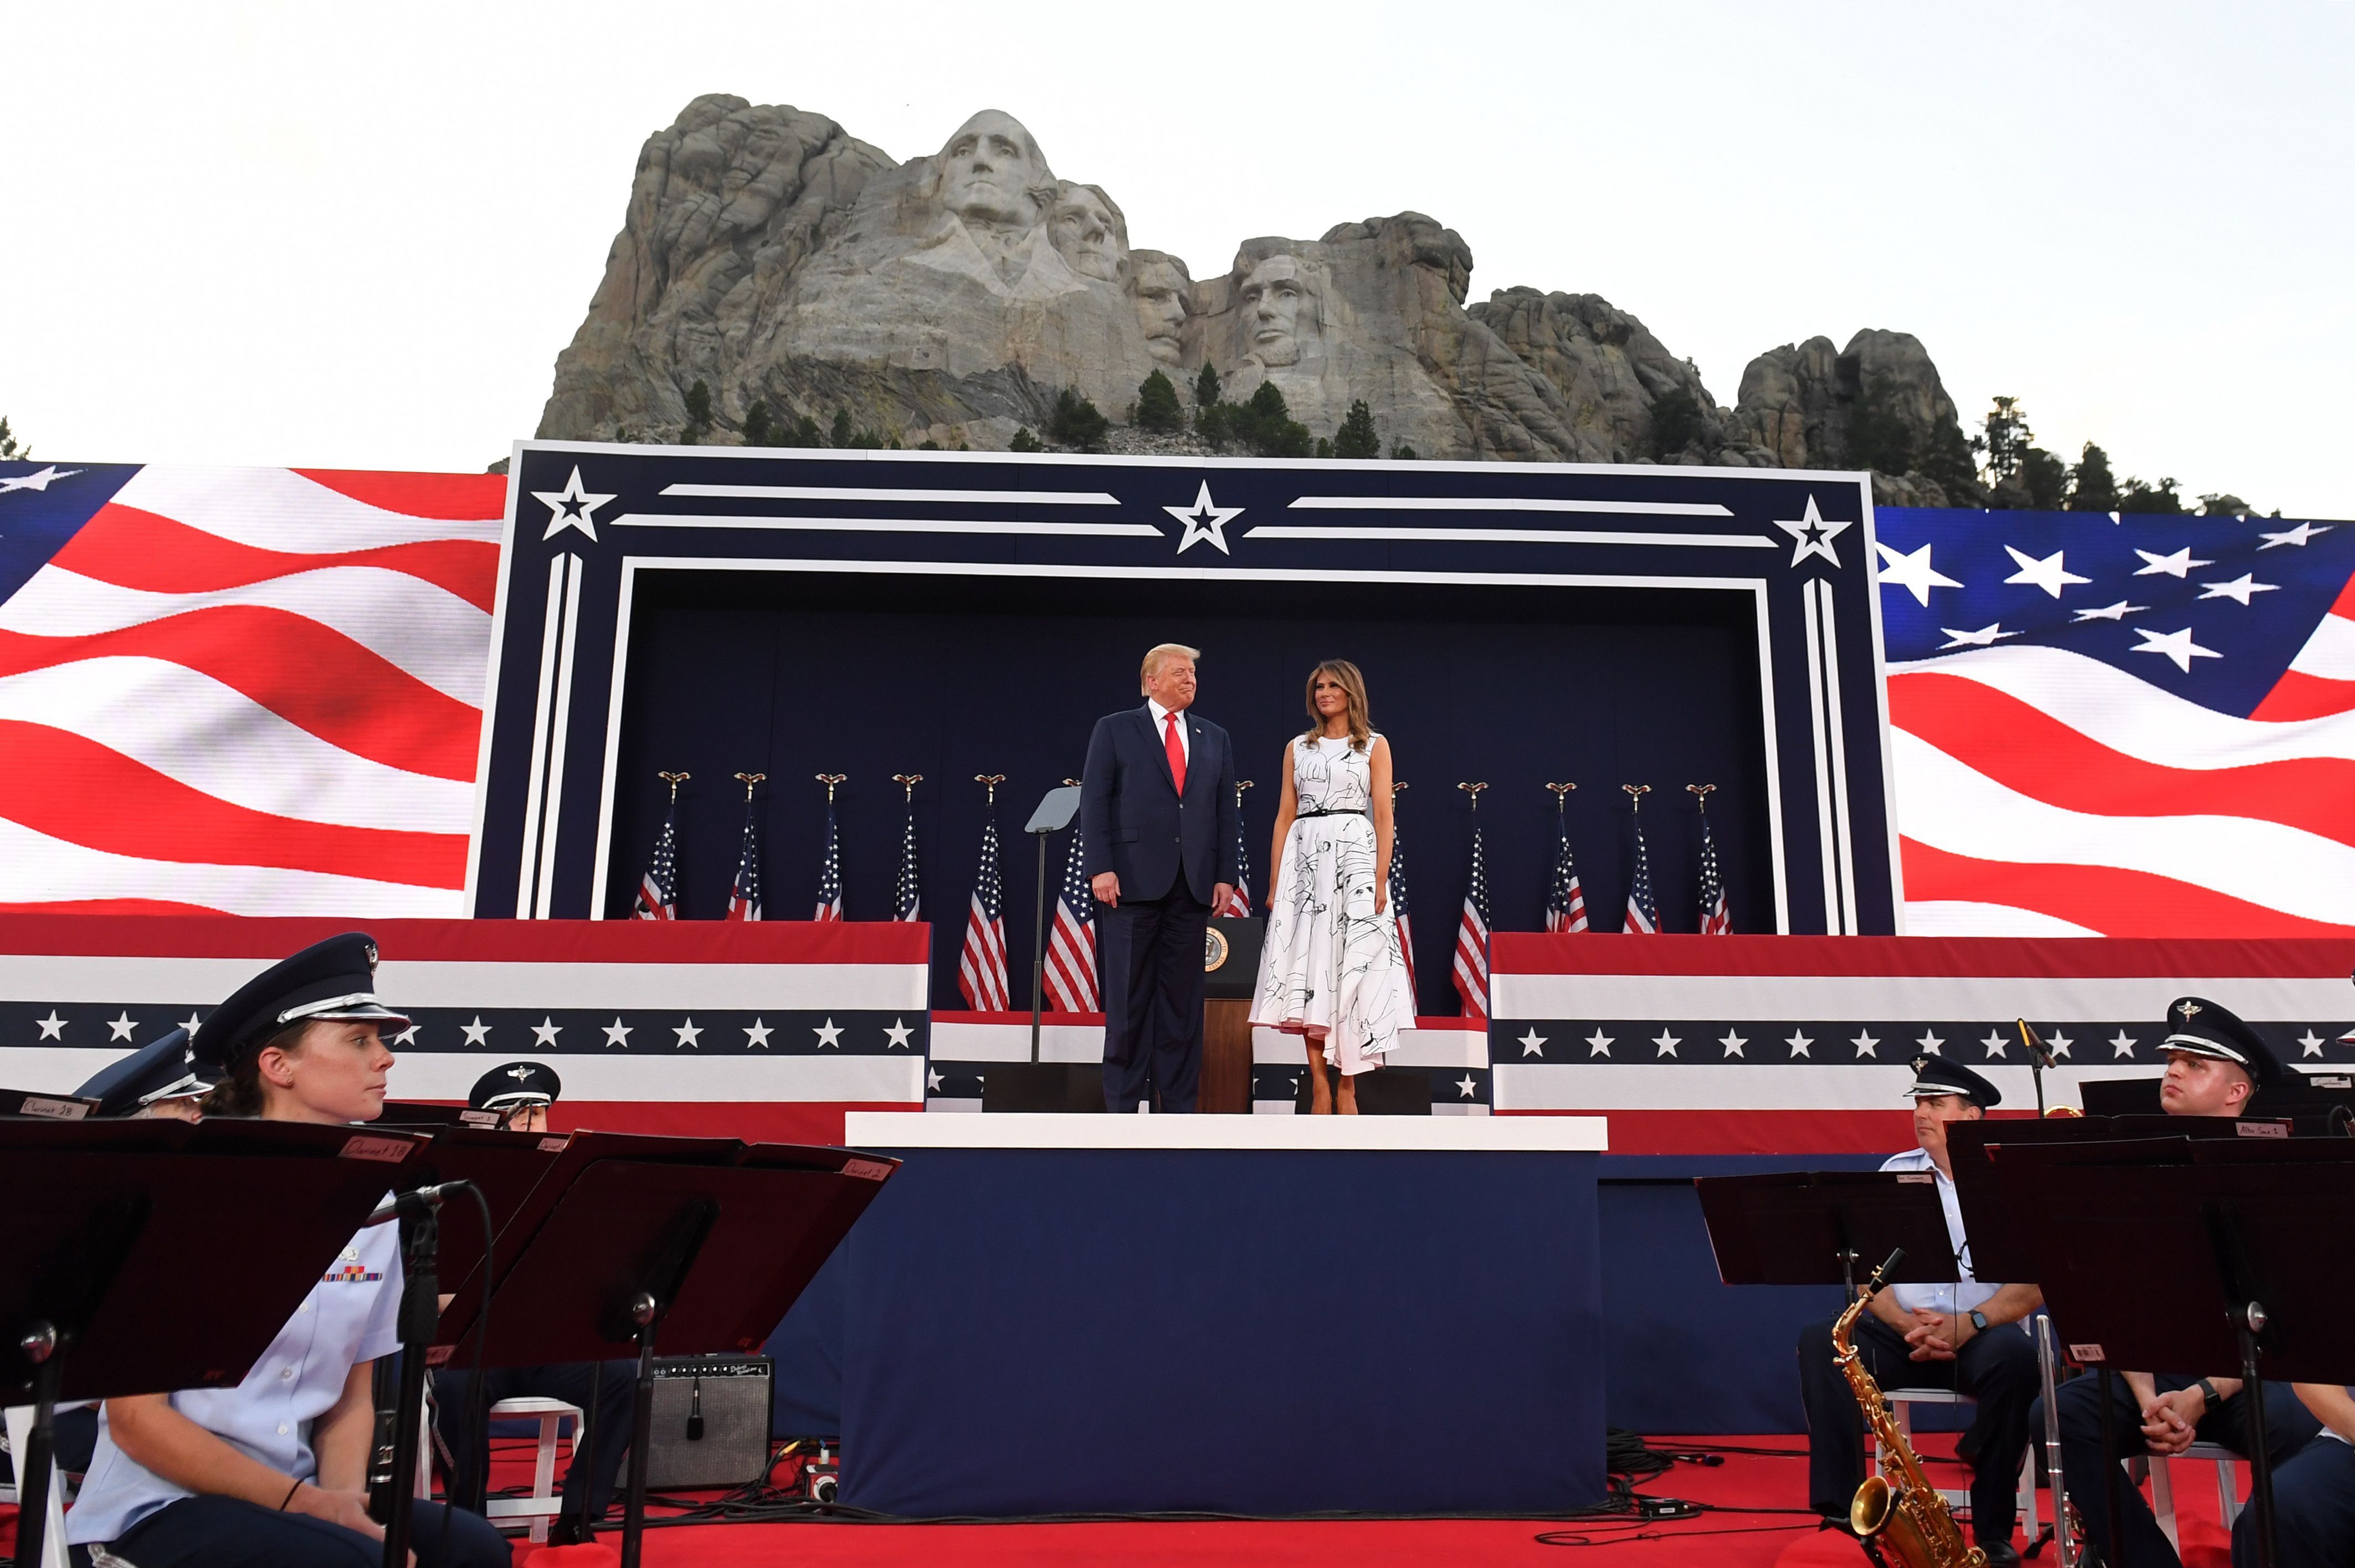 President Donald Trump and First Lady Melania Trump stand in front of Mount Rushmore on a stage